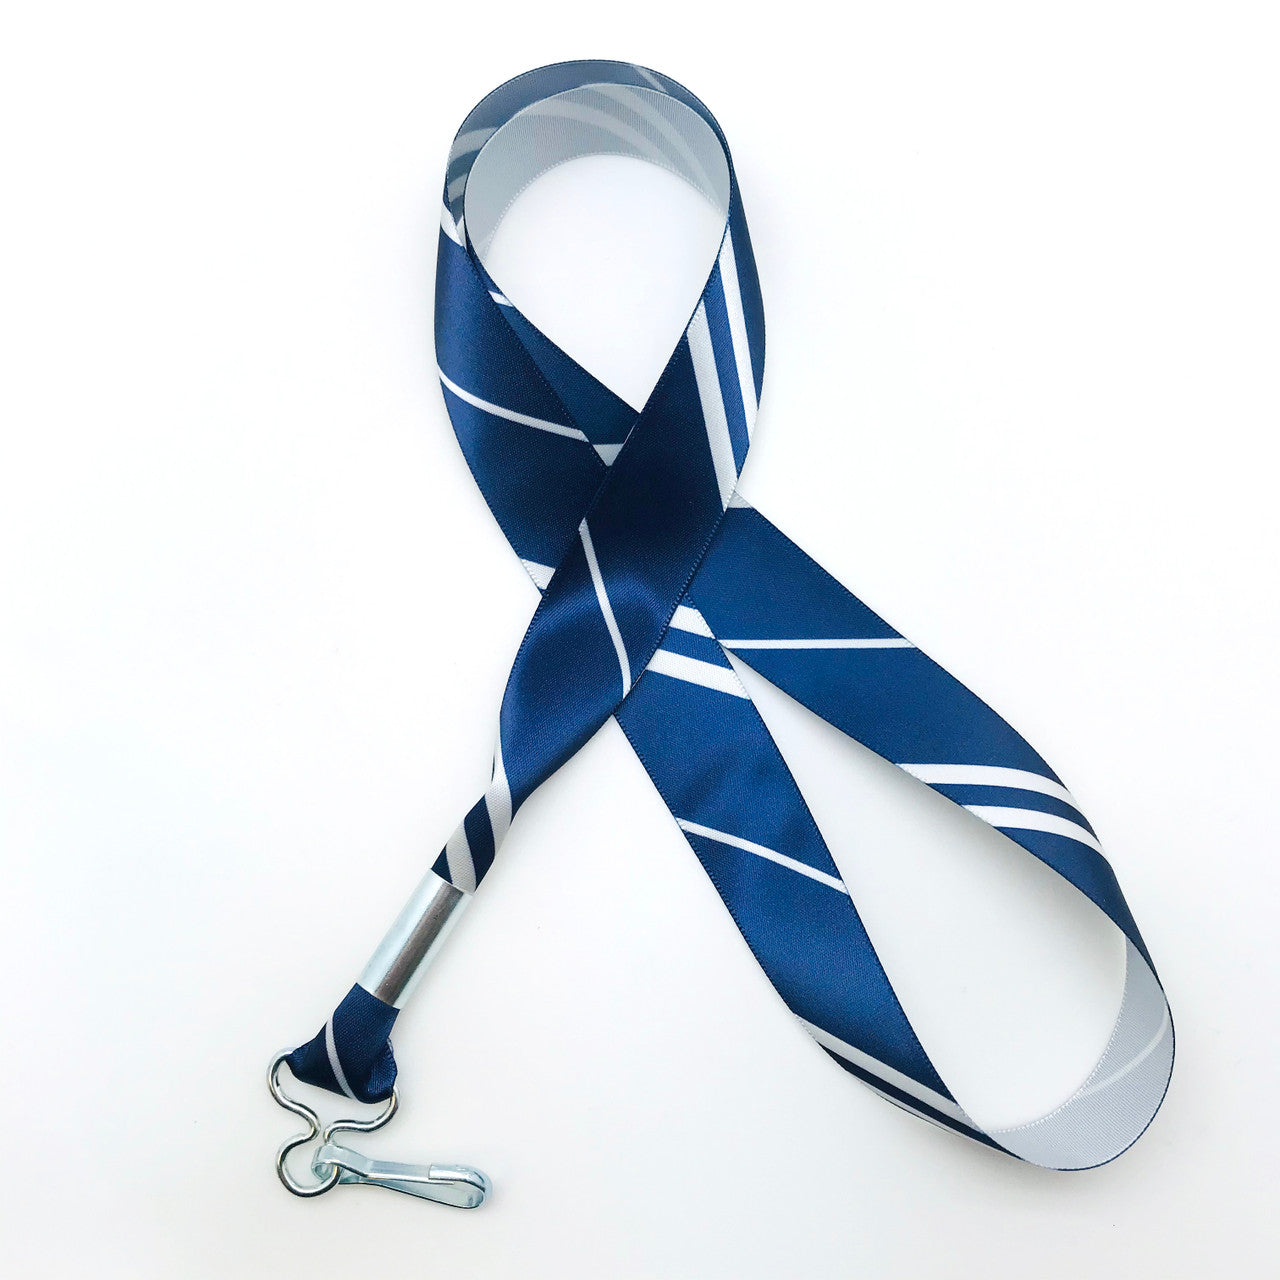 Hogwarts Ravenclaw House ribbon lanyard in blue and silver stripes printed on 7/8" silver single face satin ribbon is a fun gift idea for all the Harry Potter fans on  your gift list. Perfect for events, parties and weddings too! All our products are designed, printed and assembled in the USA